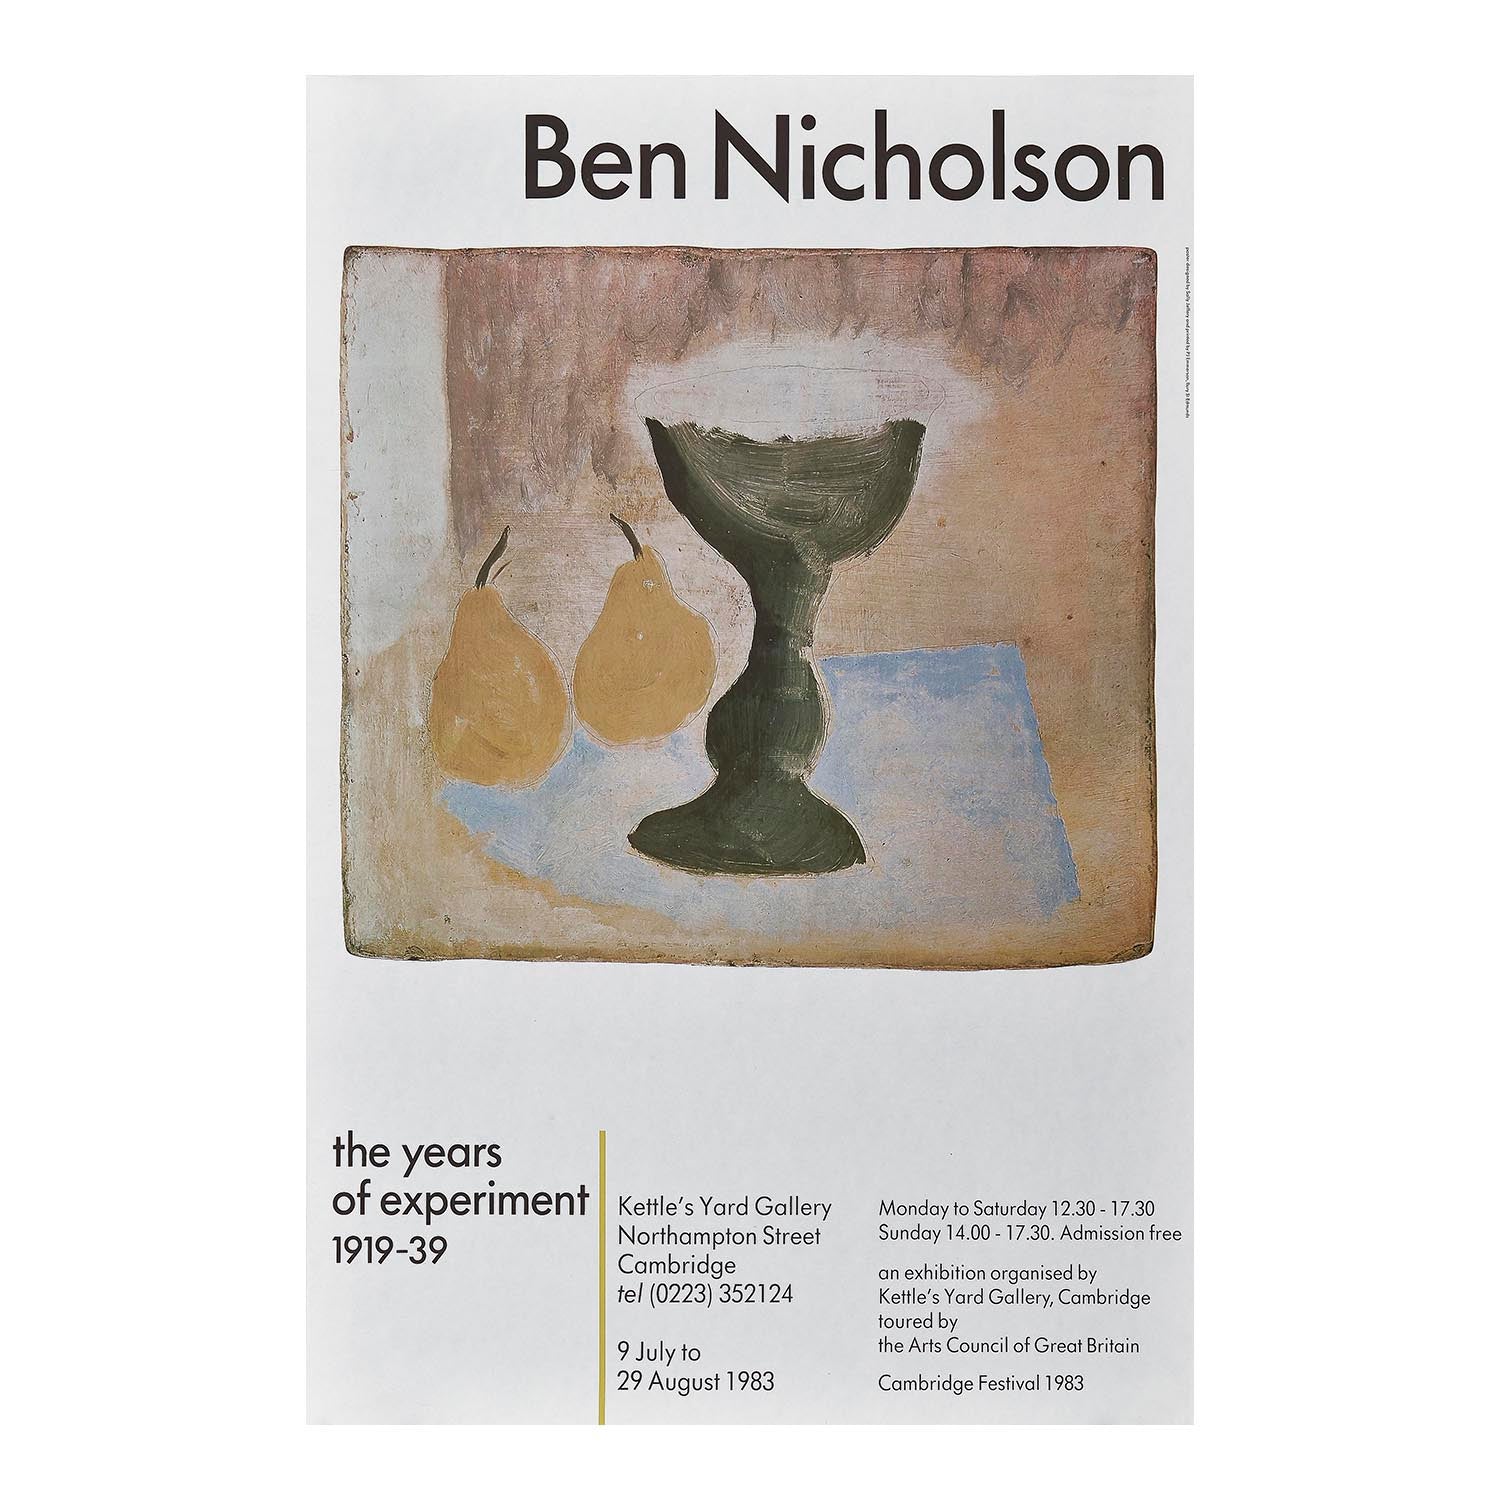 Original art exhibition poster, Ben Nicholson, the years of experiment 1919-39, held at Kettle's Yard Gallery, 1983. The design features a still life by Nicholson of a wine glass with two pears. 